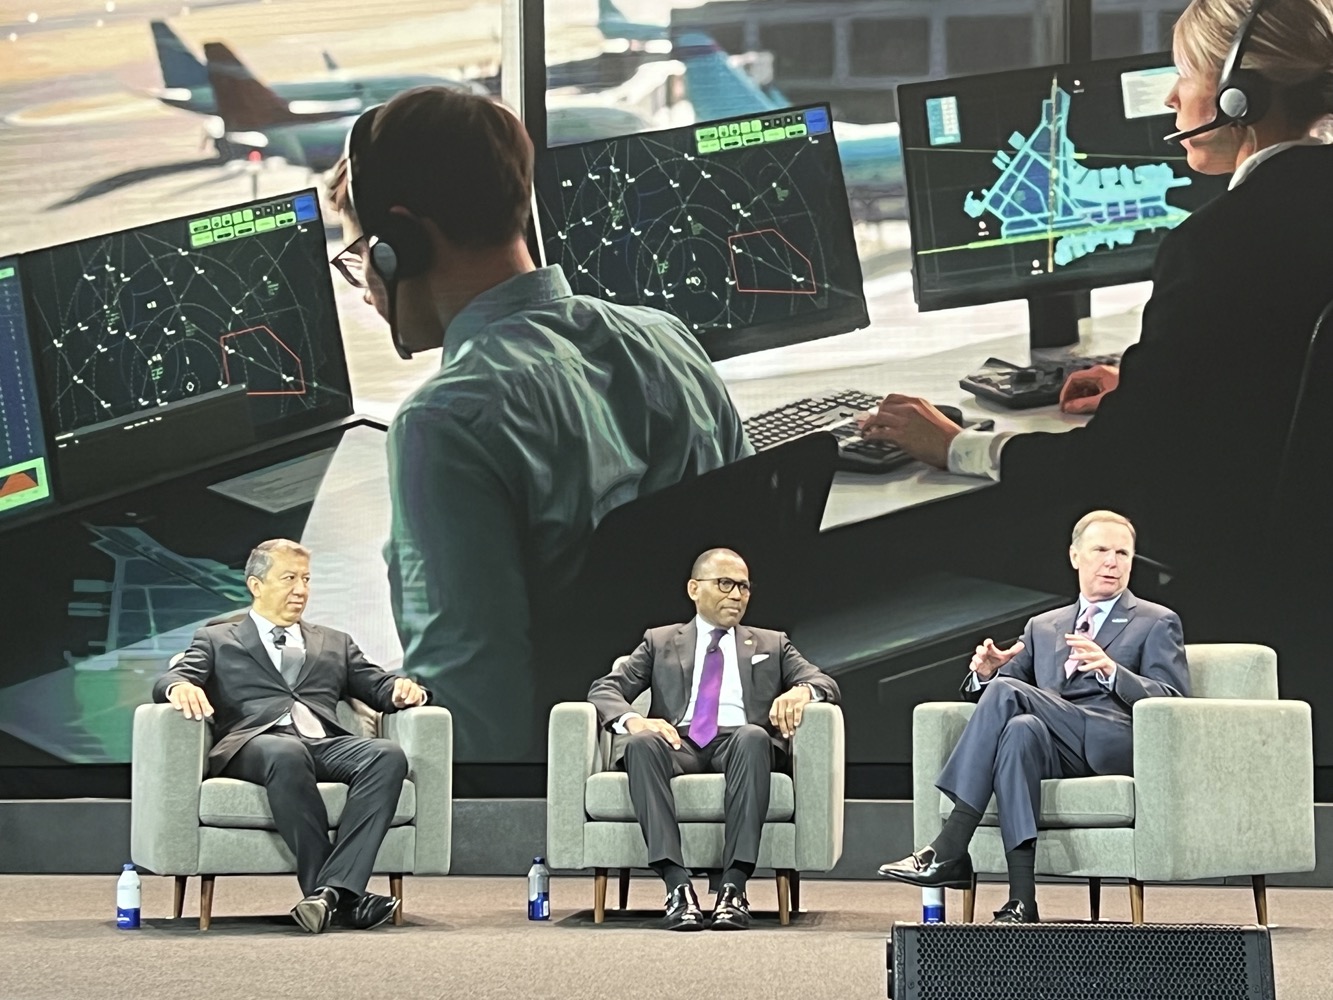 FAA Acting Administrator Billy Nolen and EASA Executive Director Patrick Ky spoke to the industry’s unwavering commitment to safety and shared their plans for new airspace entrants and goals for the future.